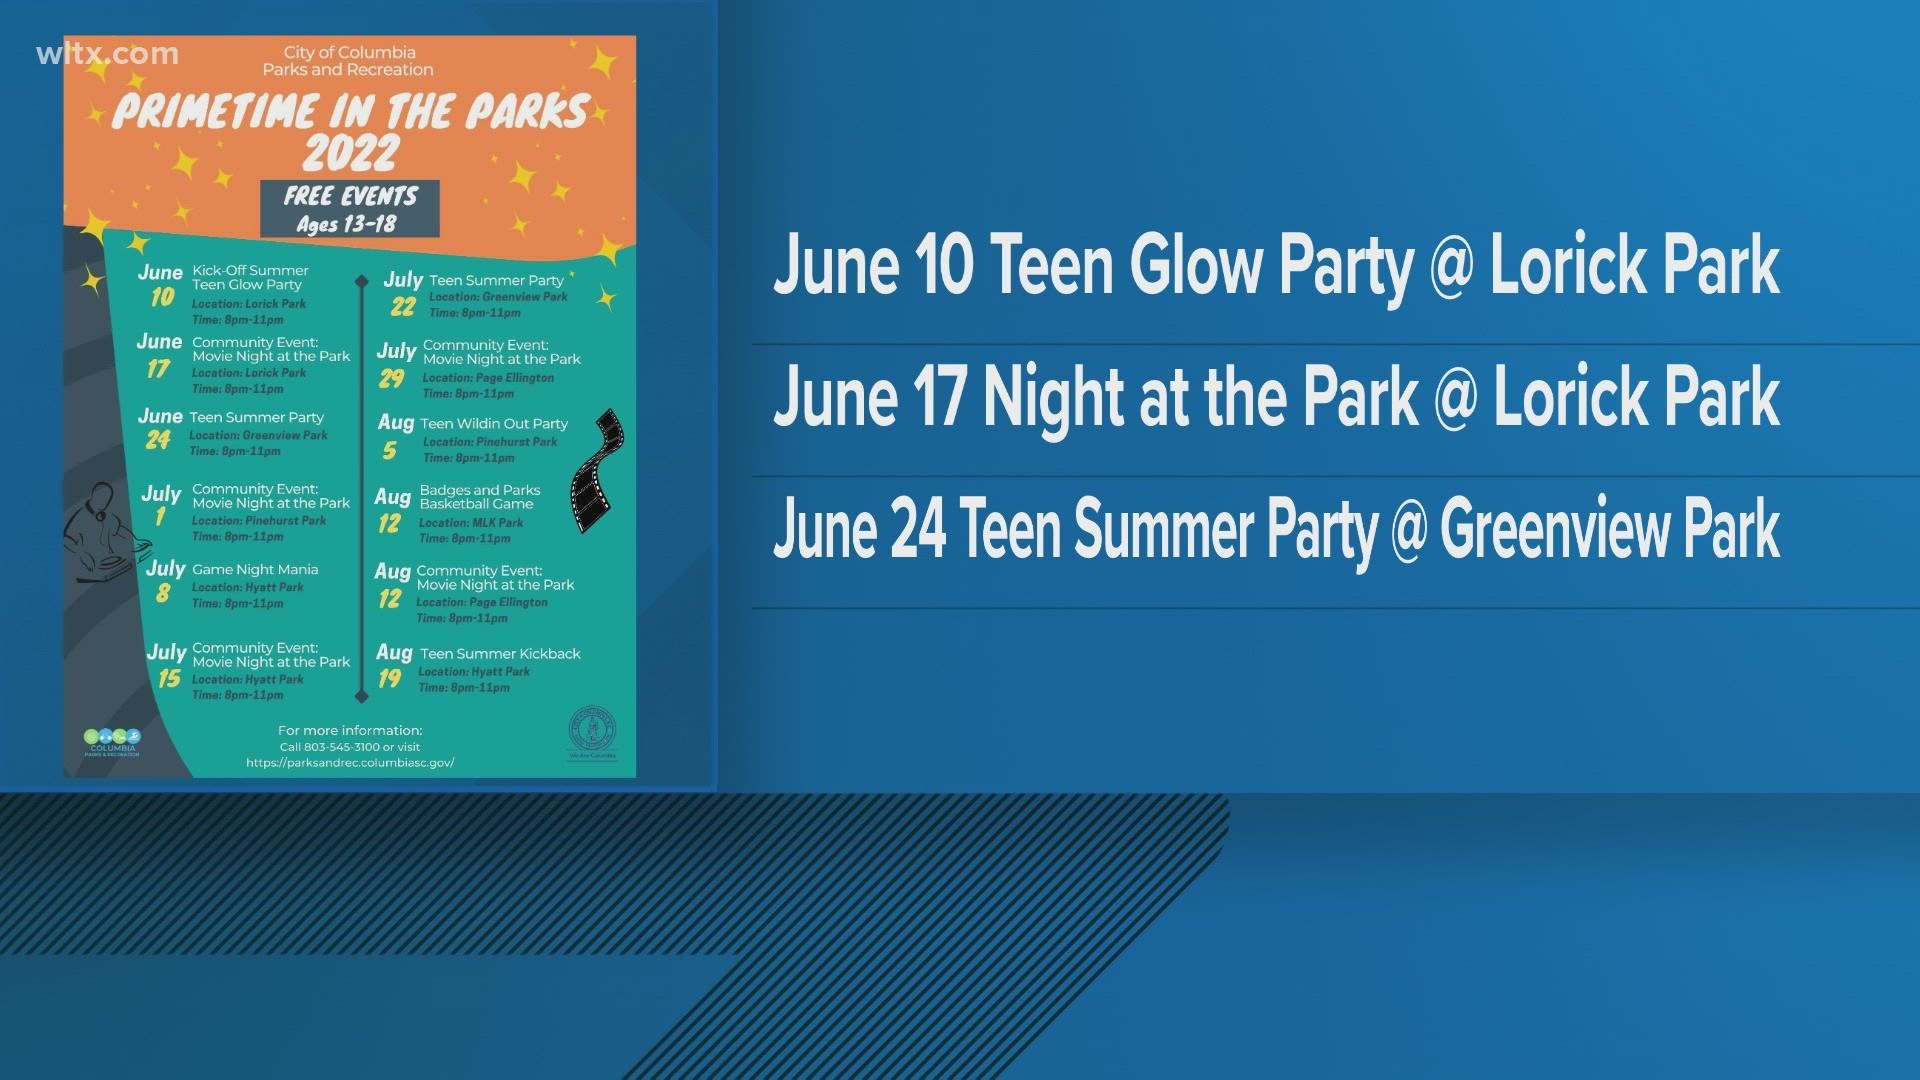 June 10th is the first night and it kicks off with a glow party at Lorick Park.